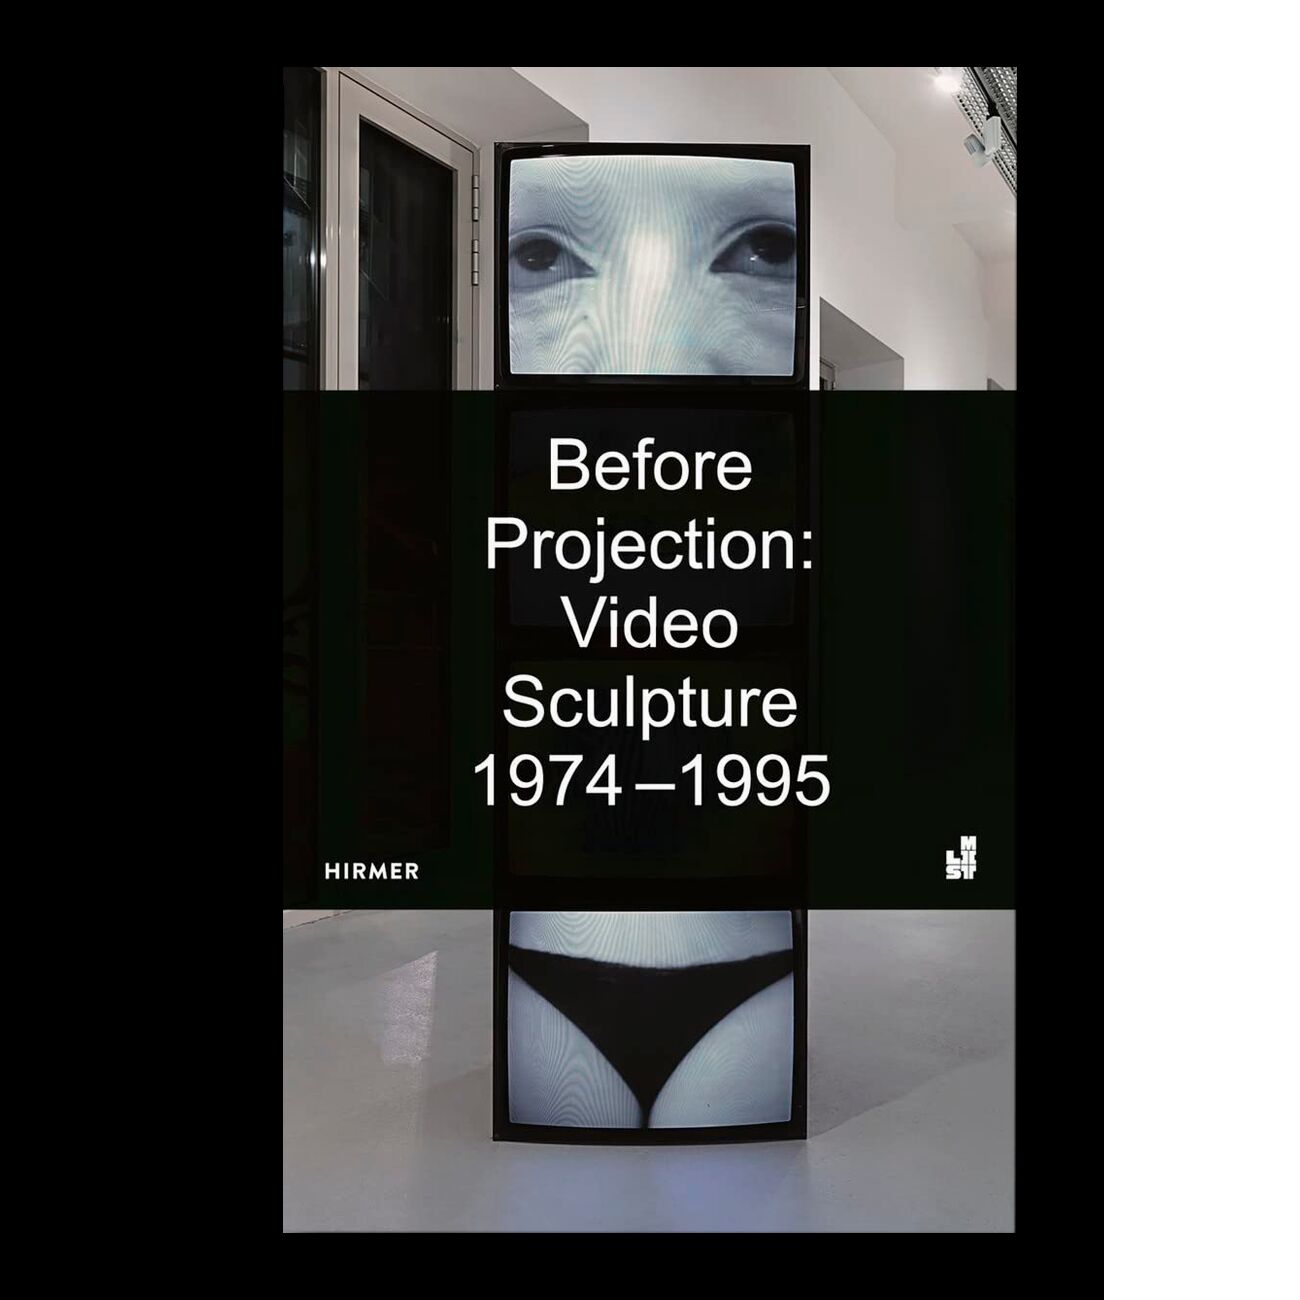 Before Projection: Video Sculpture 1974 – 1995